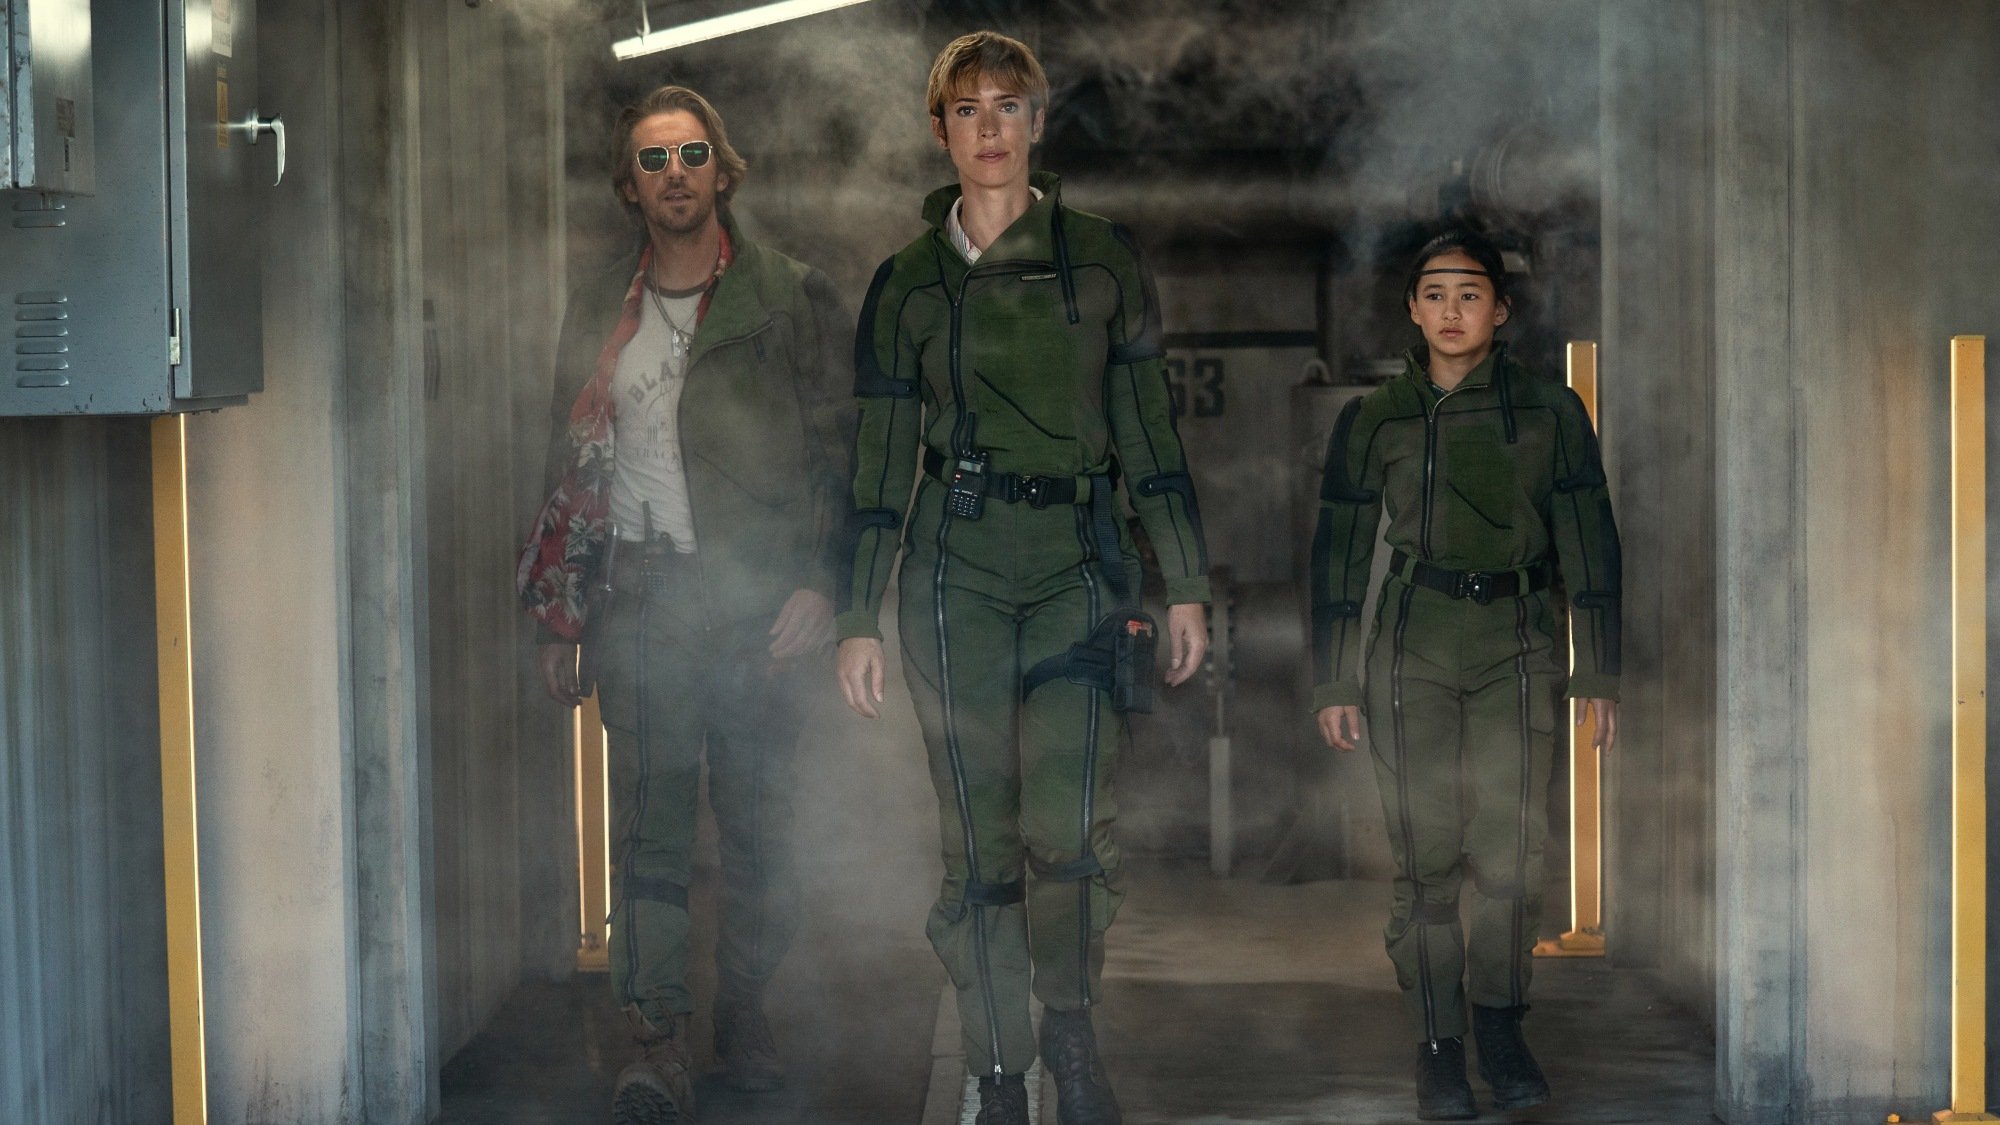 Dan Stevens as Trapper, Rebecca Hall as Dr. Ilene Andrews, and Kaylee Hottle as Jia in Warner Bros. Pictures and Legendary Pictures’ action adventure "Godzilla x Kong: The New Empire," a Warner Bros. Pictures release.